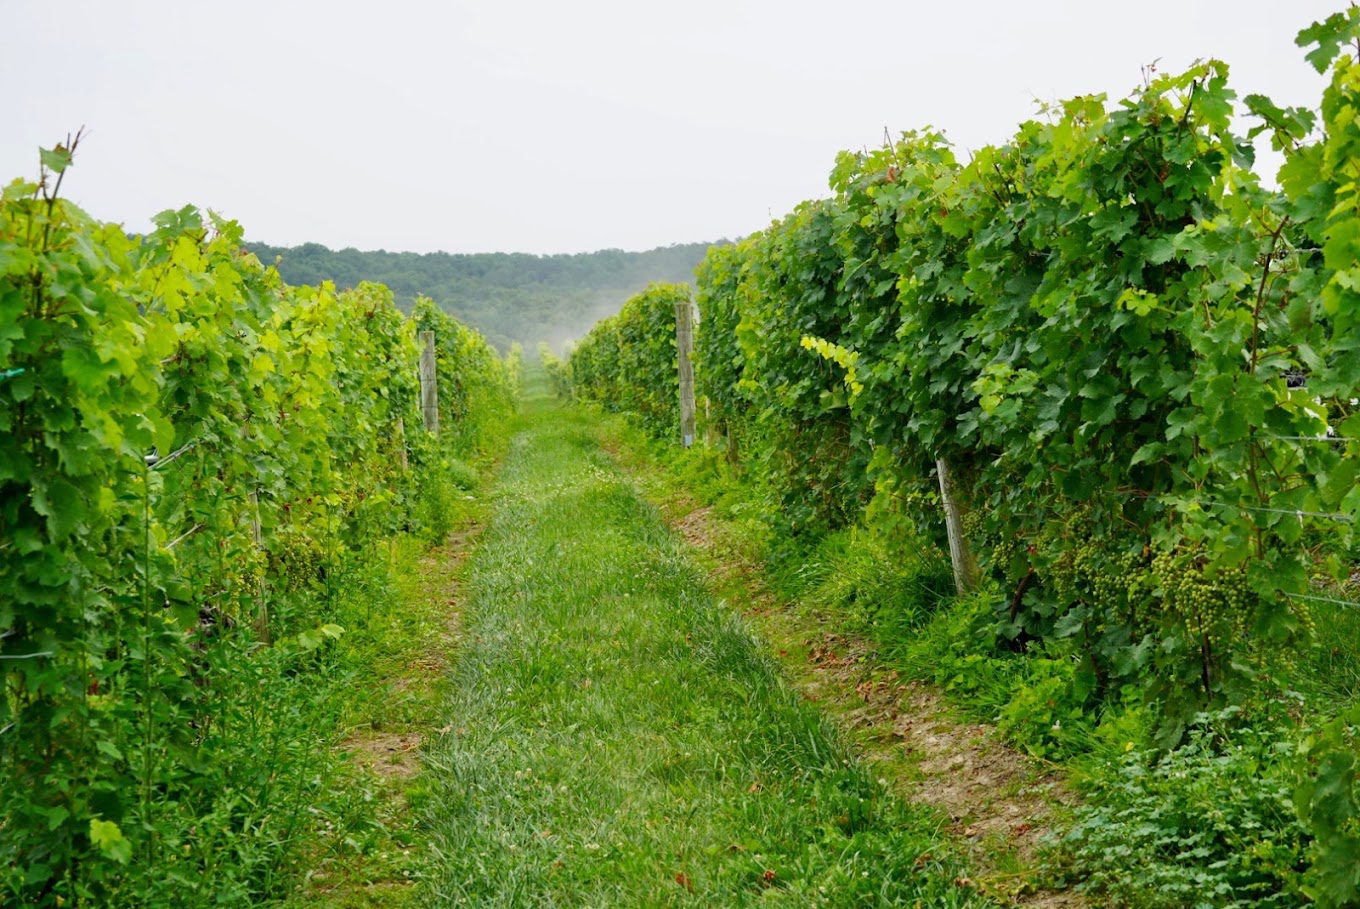 A path through the vines is shown in this picture.